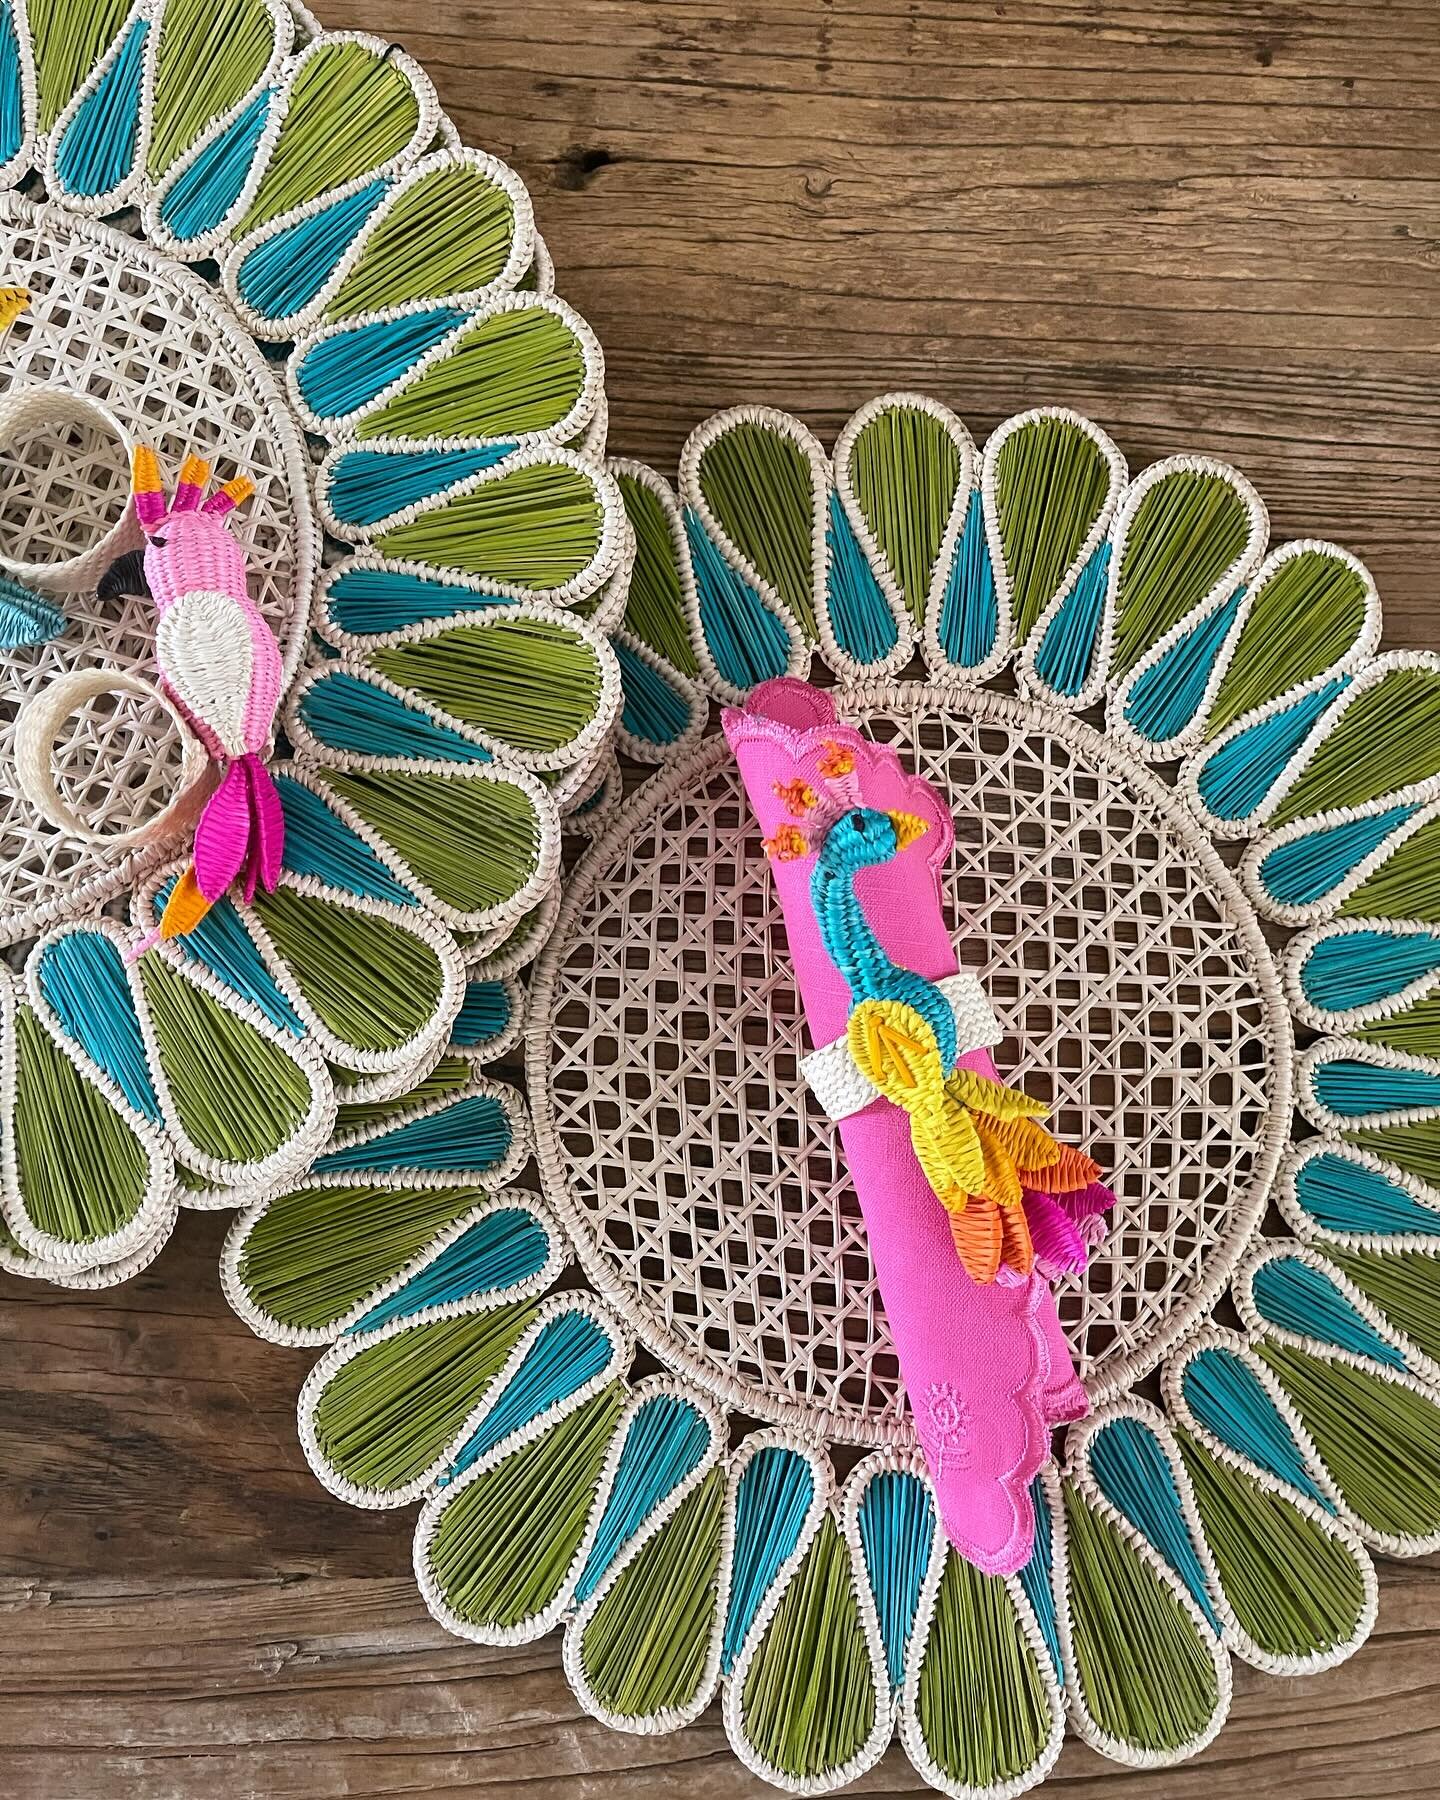 Adding some FUN to the table with these new placemats and napkin rings!  Slightly obsessed and having trouble picking a favorite! 🦜
.
.
.
#palmbeachchic #chinoiseriechic #teallovers #colorfullycollected #graciouslivingstyle #youcansetwithus #tablesc